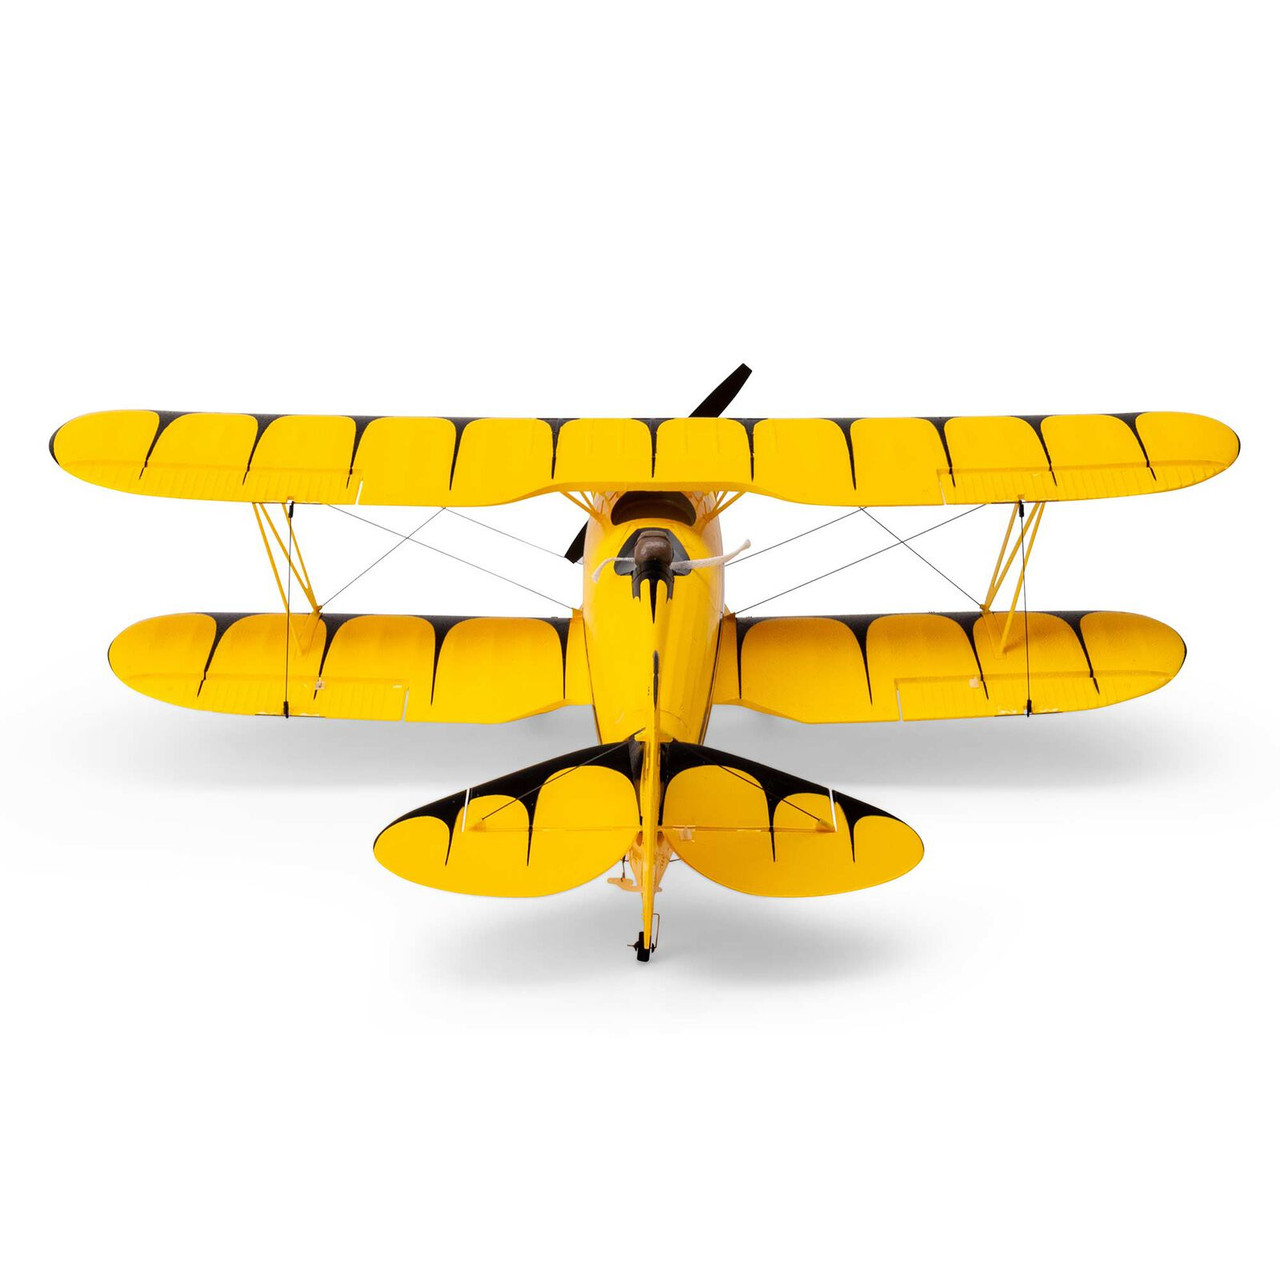 Eflite UMX WACO BNF Basic with AS3X and SAFE Select, Yellow